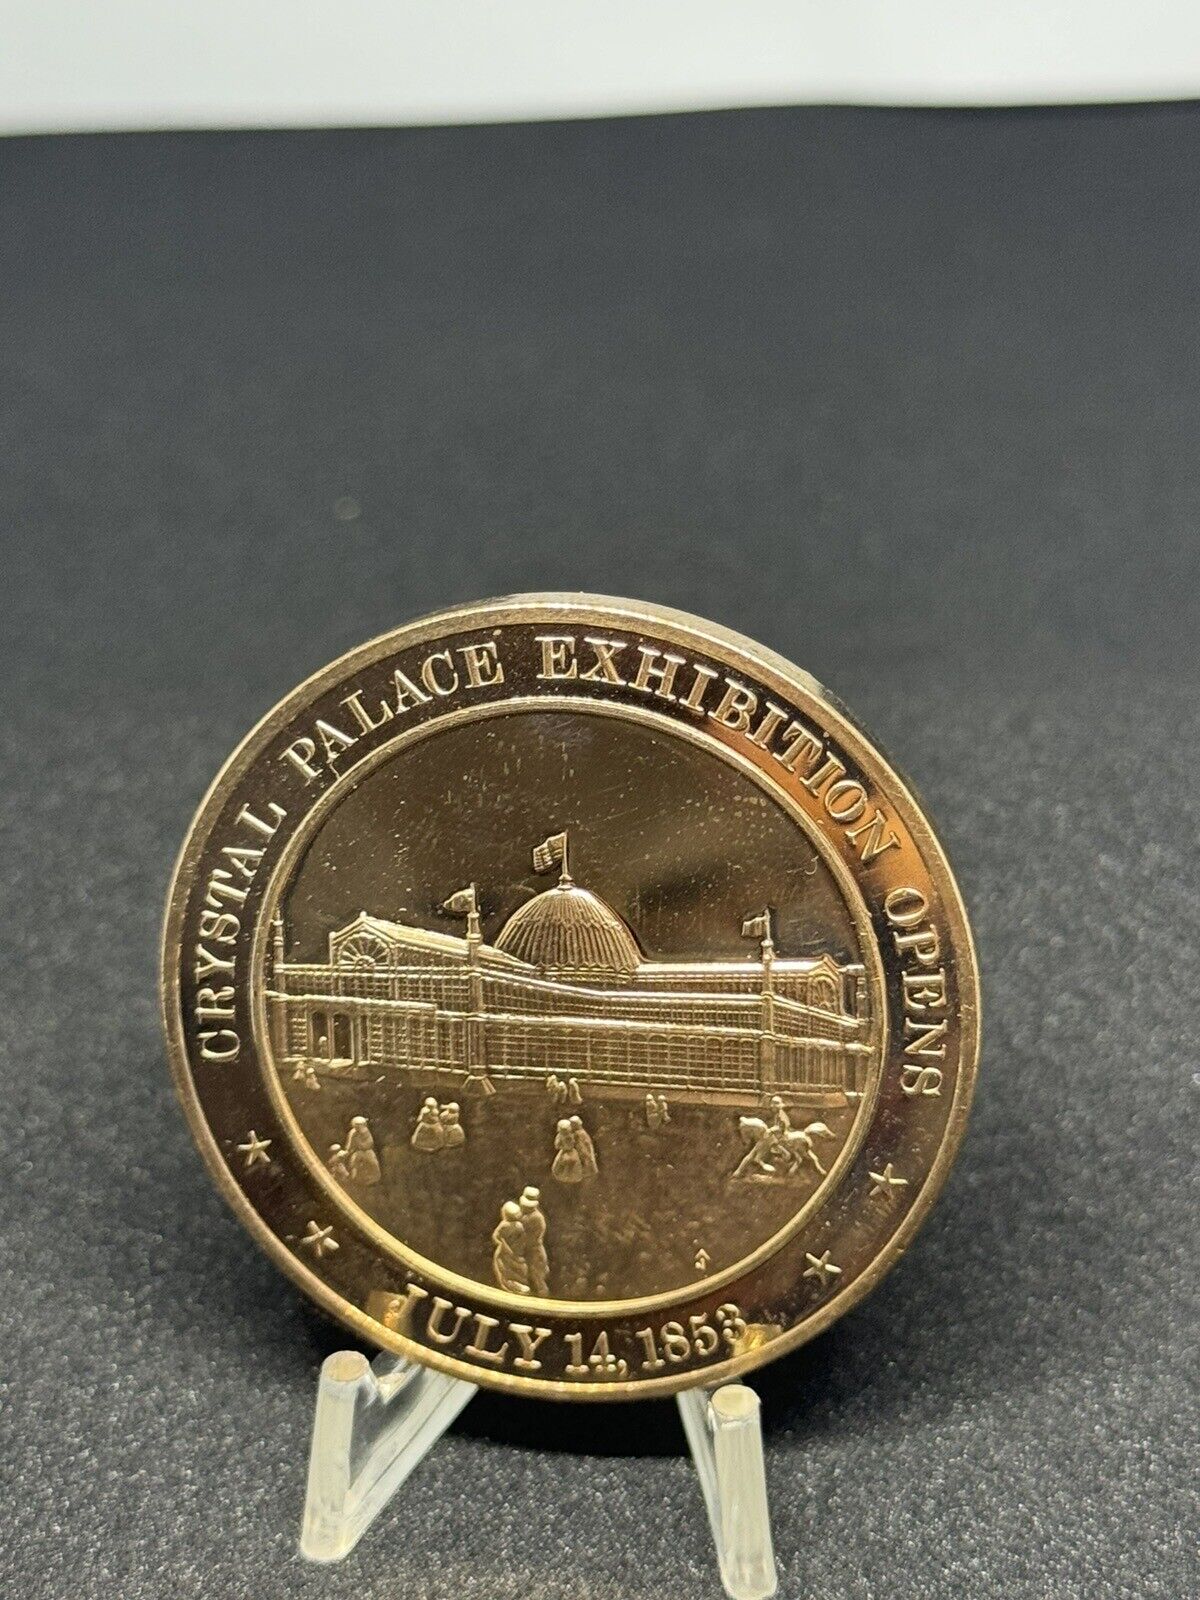 Crystal Palace Exhibition Opens - July 14, 1853 Coin A21